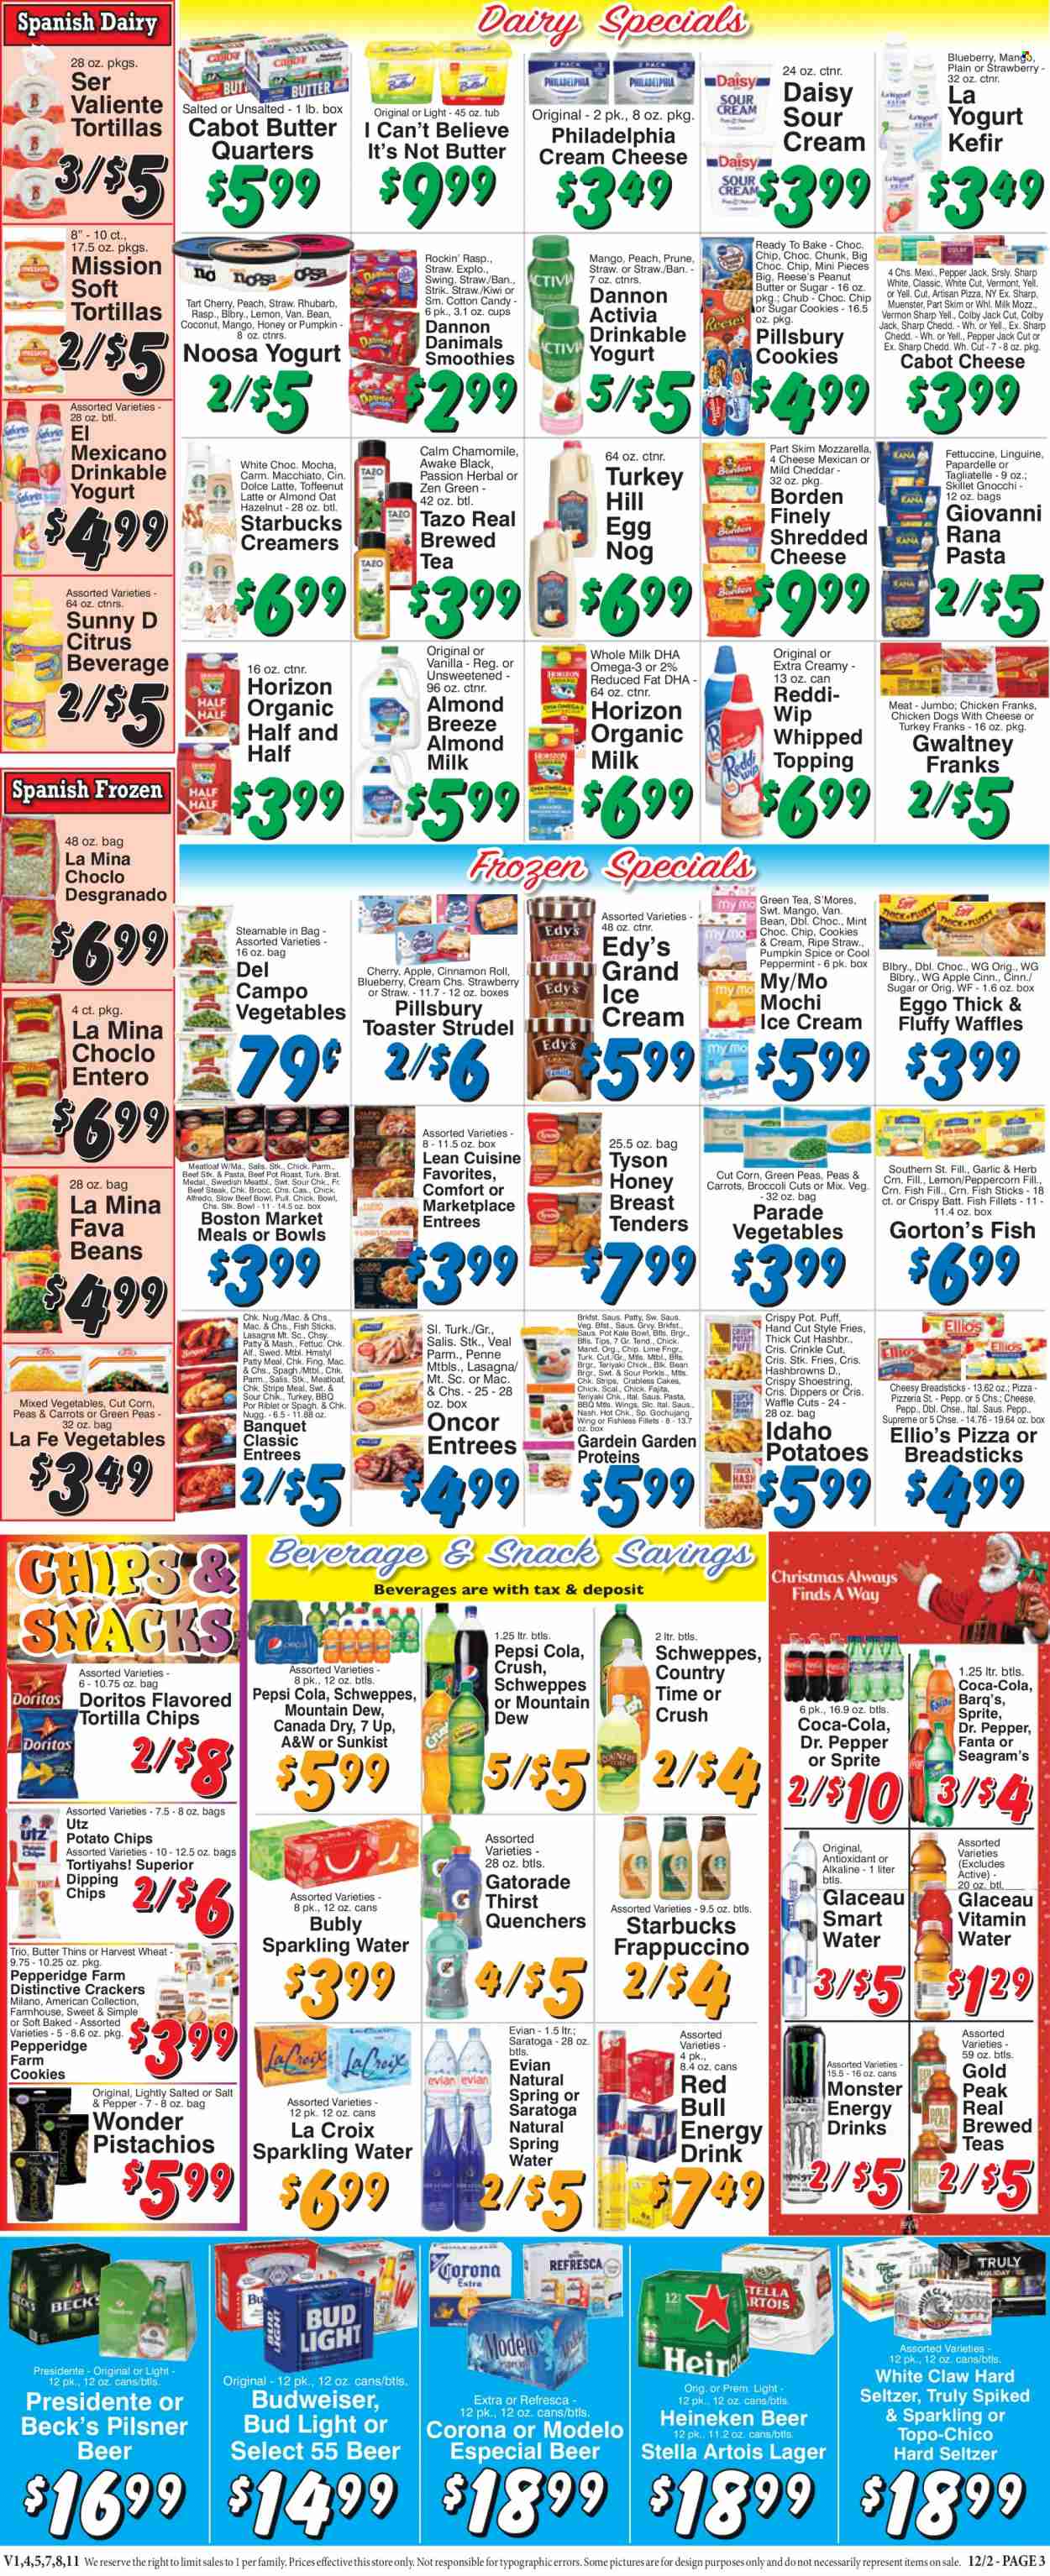 thumbnail - Trade Fair Supermarket Flyer - 12/02/2022 - 12/08/2022 - Sales products - cake, strudel, cinnamon roll, waffles, beans, broccoli, corn, fava beans, kale, kiwi, coconut, fish fillets, fish, fish fingers, Gorton's, fish sticks, gnocchi, pizza, pasta, Pillsbury, meatloaf, fajita, lasagna meal, Lean Cuisine, Giovanni Rana, Rana, chicken frankfurters, Colby cheese, cream cheese, mild cheddar, shredded cheese, Philadelphia, Pepper Jack cheese, Münster cheese, yoghurt, Activia, Dannon, Danimals, almond milk, organic milk, Almond Breeze, kefir, eggs, I Can't Believe It's Not Butter, sour cream, ice cream, Reese's, mixed vegetables, strips, hash browns, potato fries, cookies, snack, cotton candy, crackers, bread sticks, Doritos, tortilla chips, potato chips, Thins, oats, topping, penne, spice, peanut butter, pistachios, Canada Dry, Coca-Cola, Mountain Dew, Schweppes, Sprite, Pepsi, Fanta, energy drink, Monster, Dr. Pepper, 7UP, Red Bull, Monster Energy, A&W, Country Time, Gatorade, smoothie, spring water, sparkling water, Smartwater, Evian, vitamin water, green tea, tea, Starbucks, frappuccino, White Claw, Hard Seltzer, TRULY, beer, Bud Light, Corona Extra, Heineken, Beck's, Lager, Modelo, beef meat, beef steak, steak, Budweiser, Stella Artois, Half and half. Page 3.